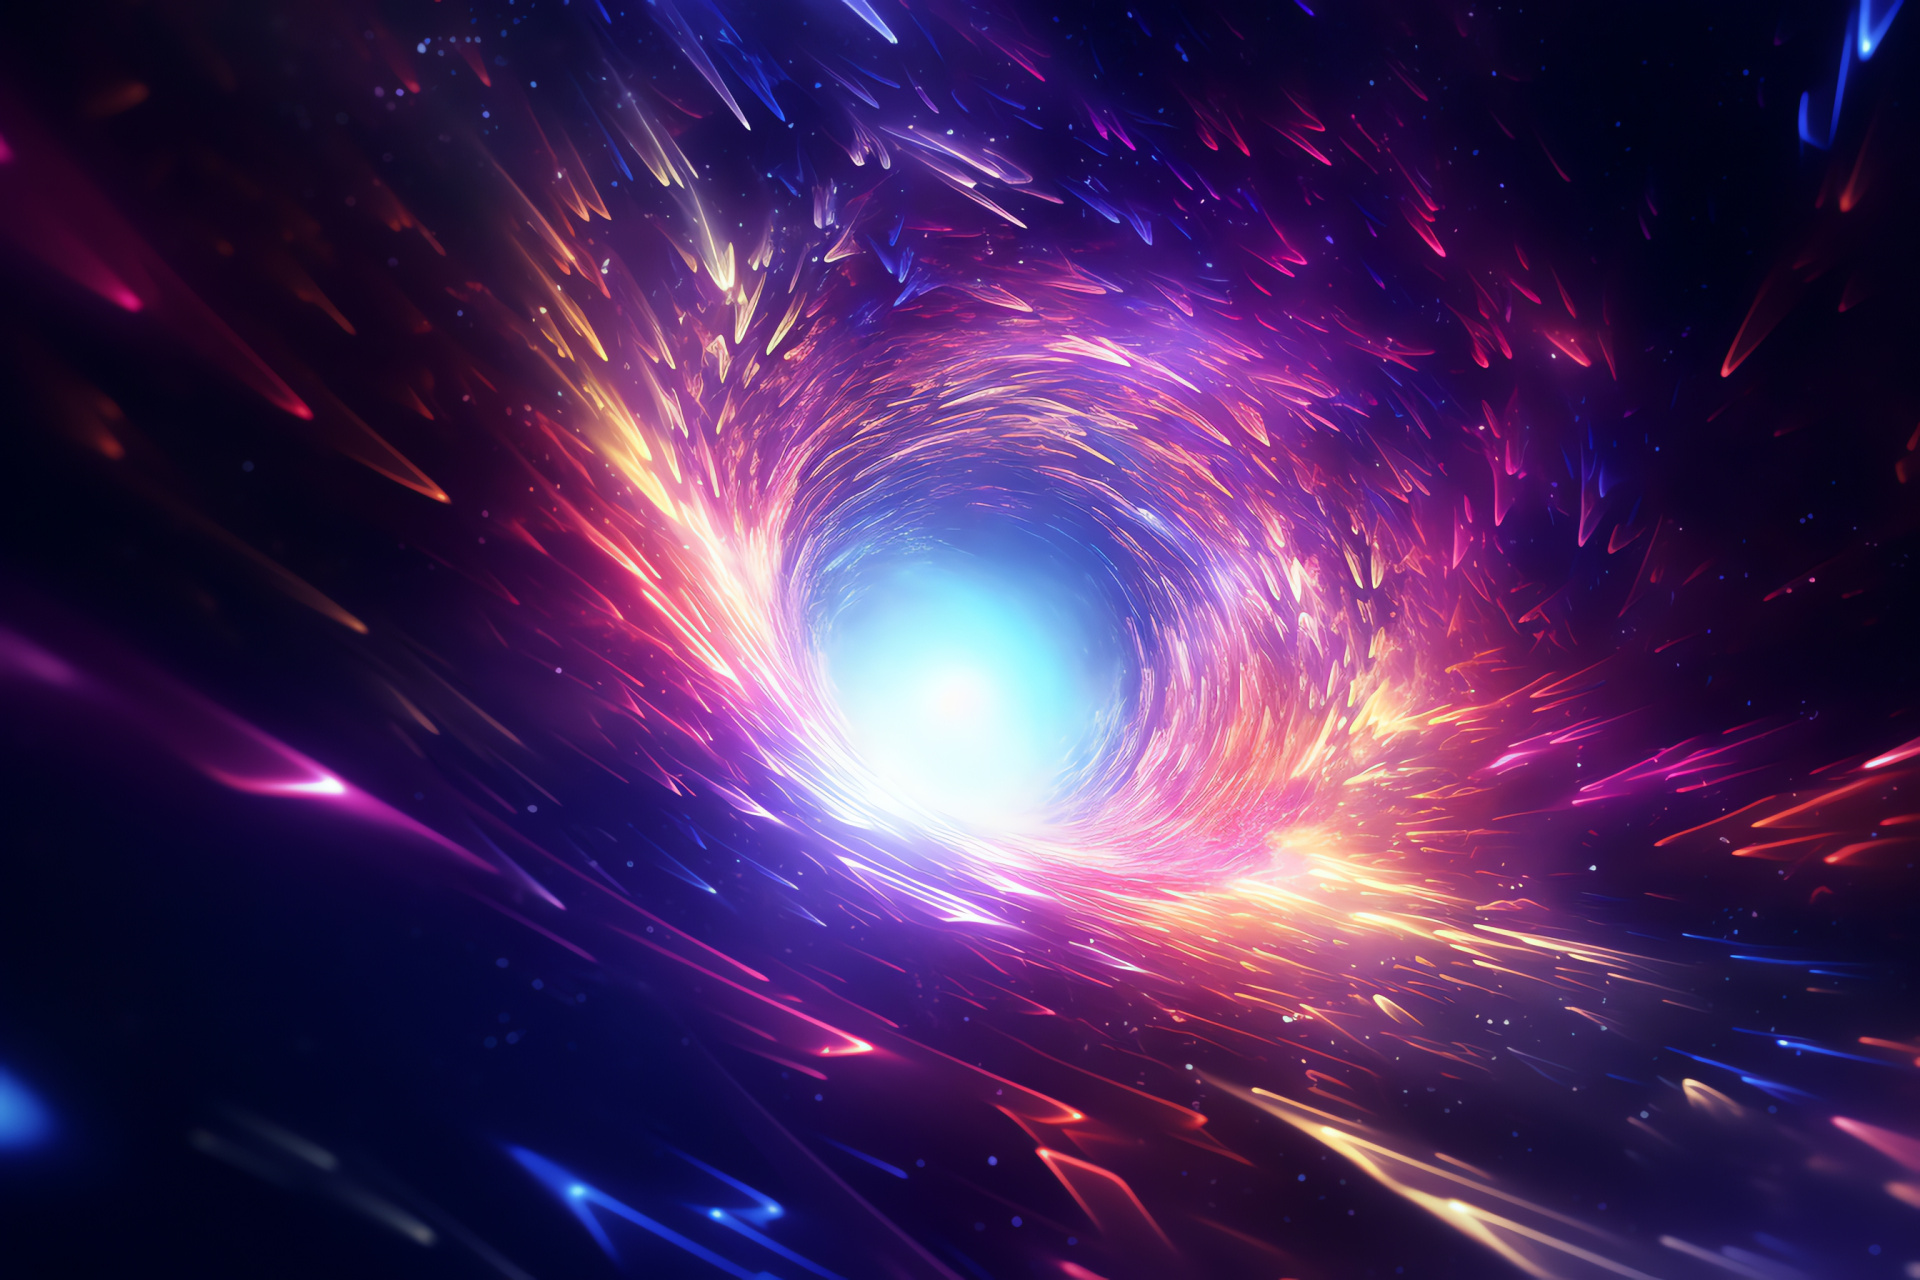 Cosmic phenomenon, Space-time conduit, Circular aperture, Radiant luminescence, Structural complexity, HD Desktop Image